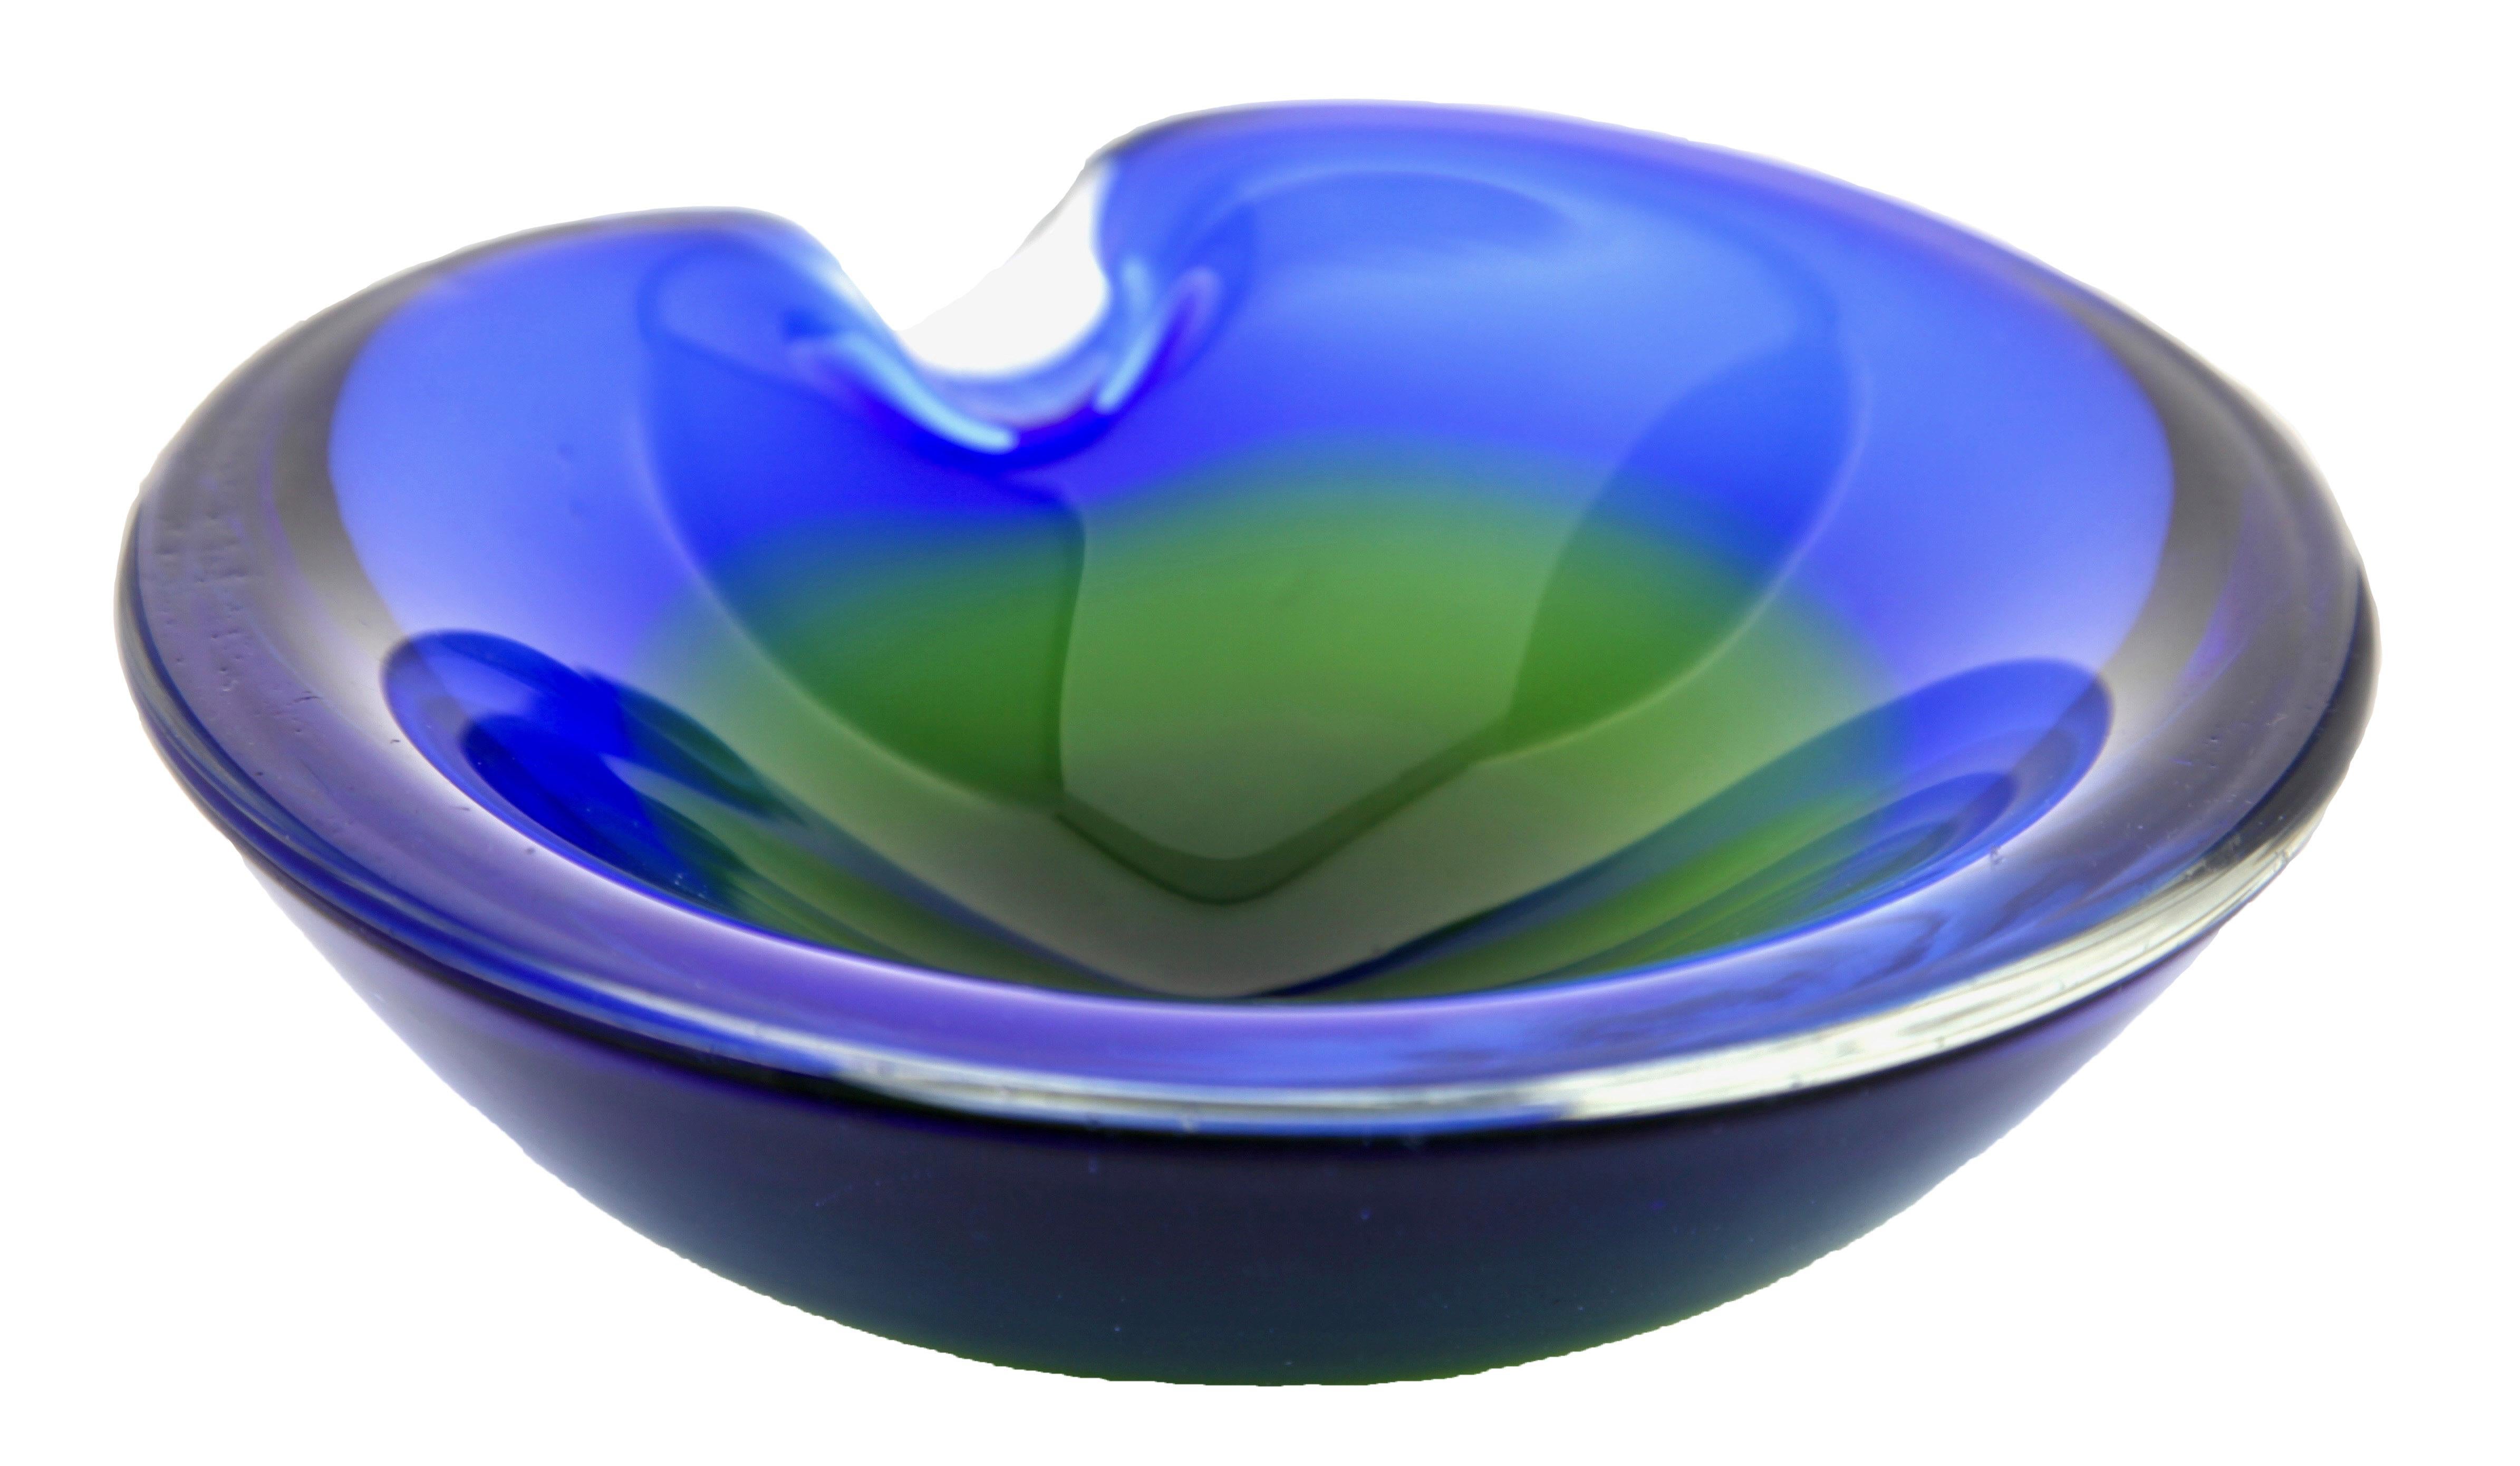 Hand-Crafted Murano Bowl in Cobalt Blue Mouth Blown Art Glass, Italian Design, 1960s